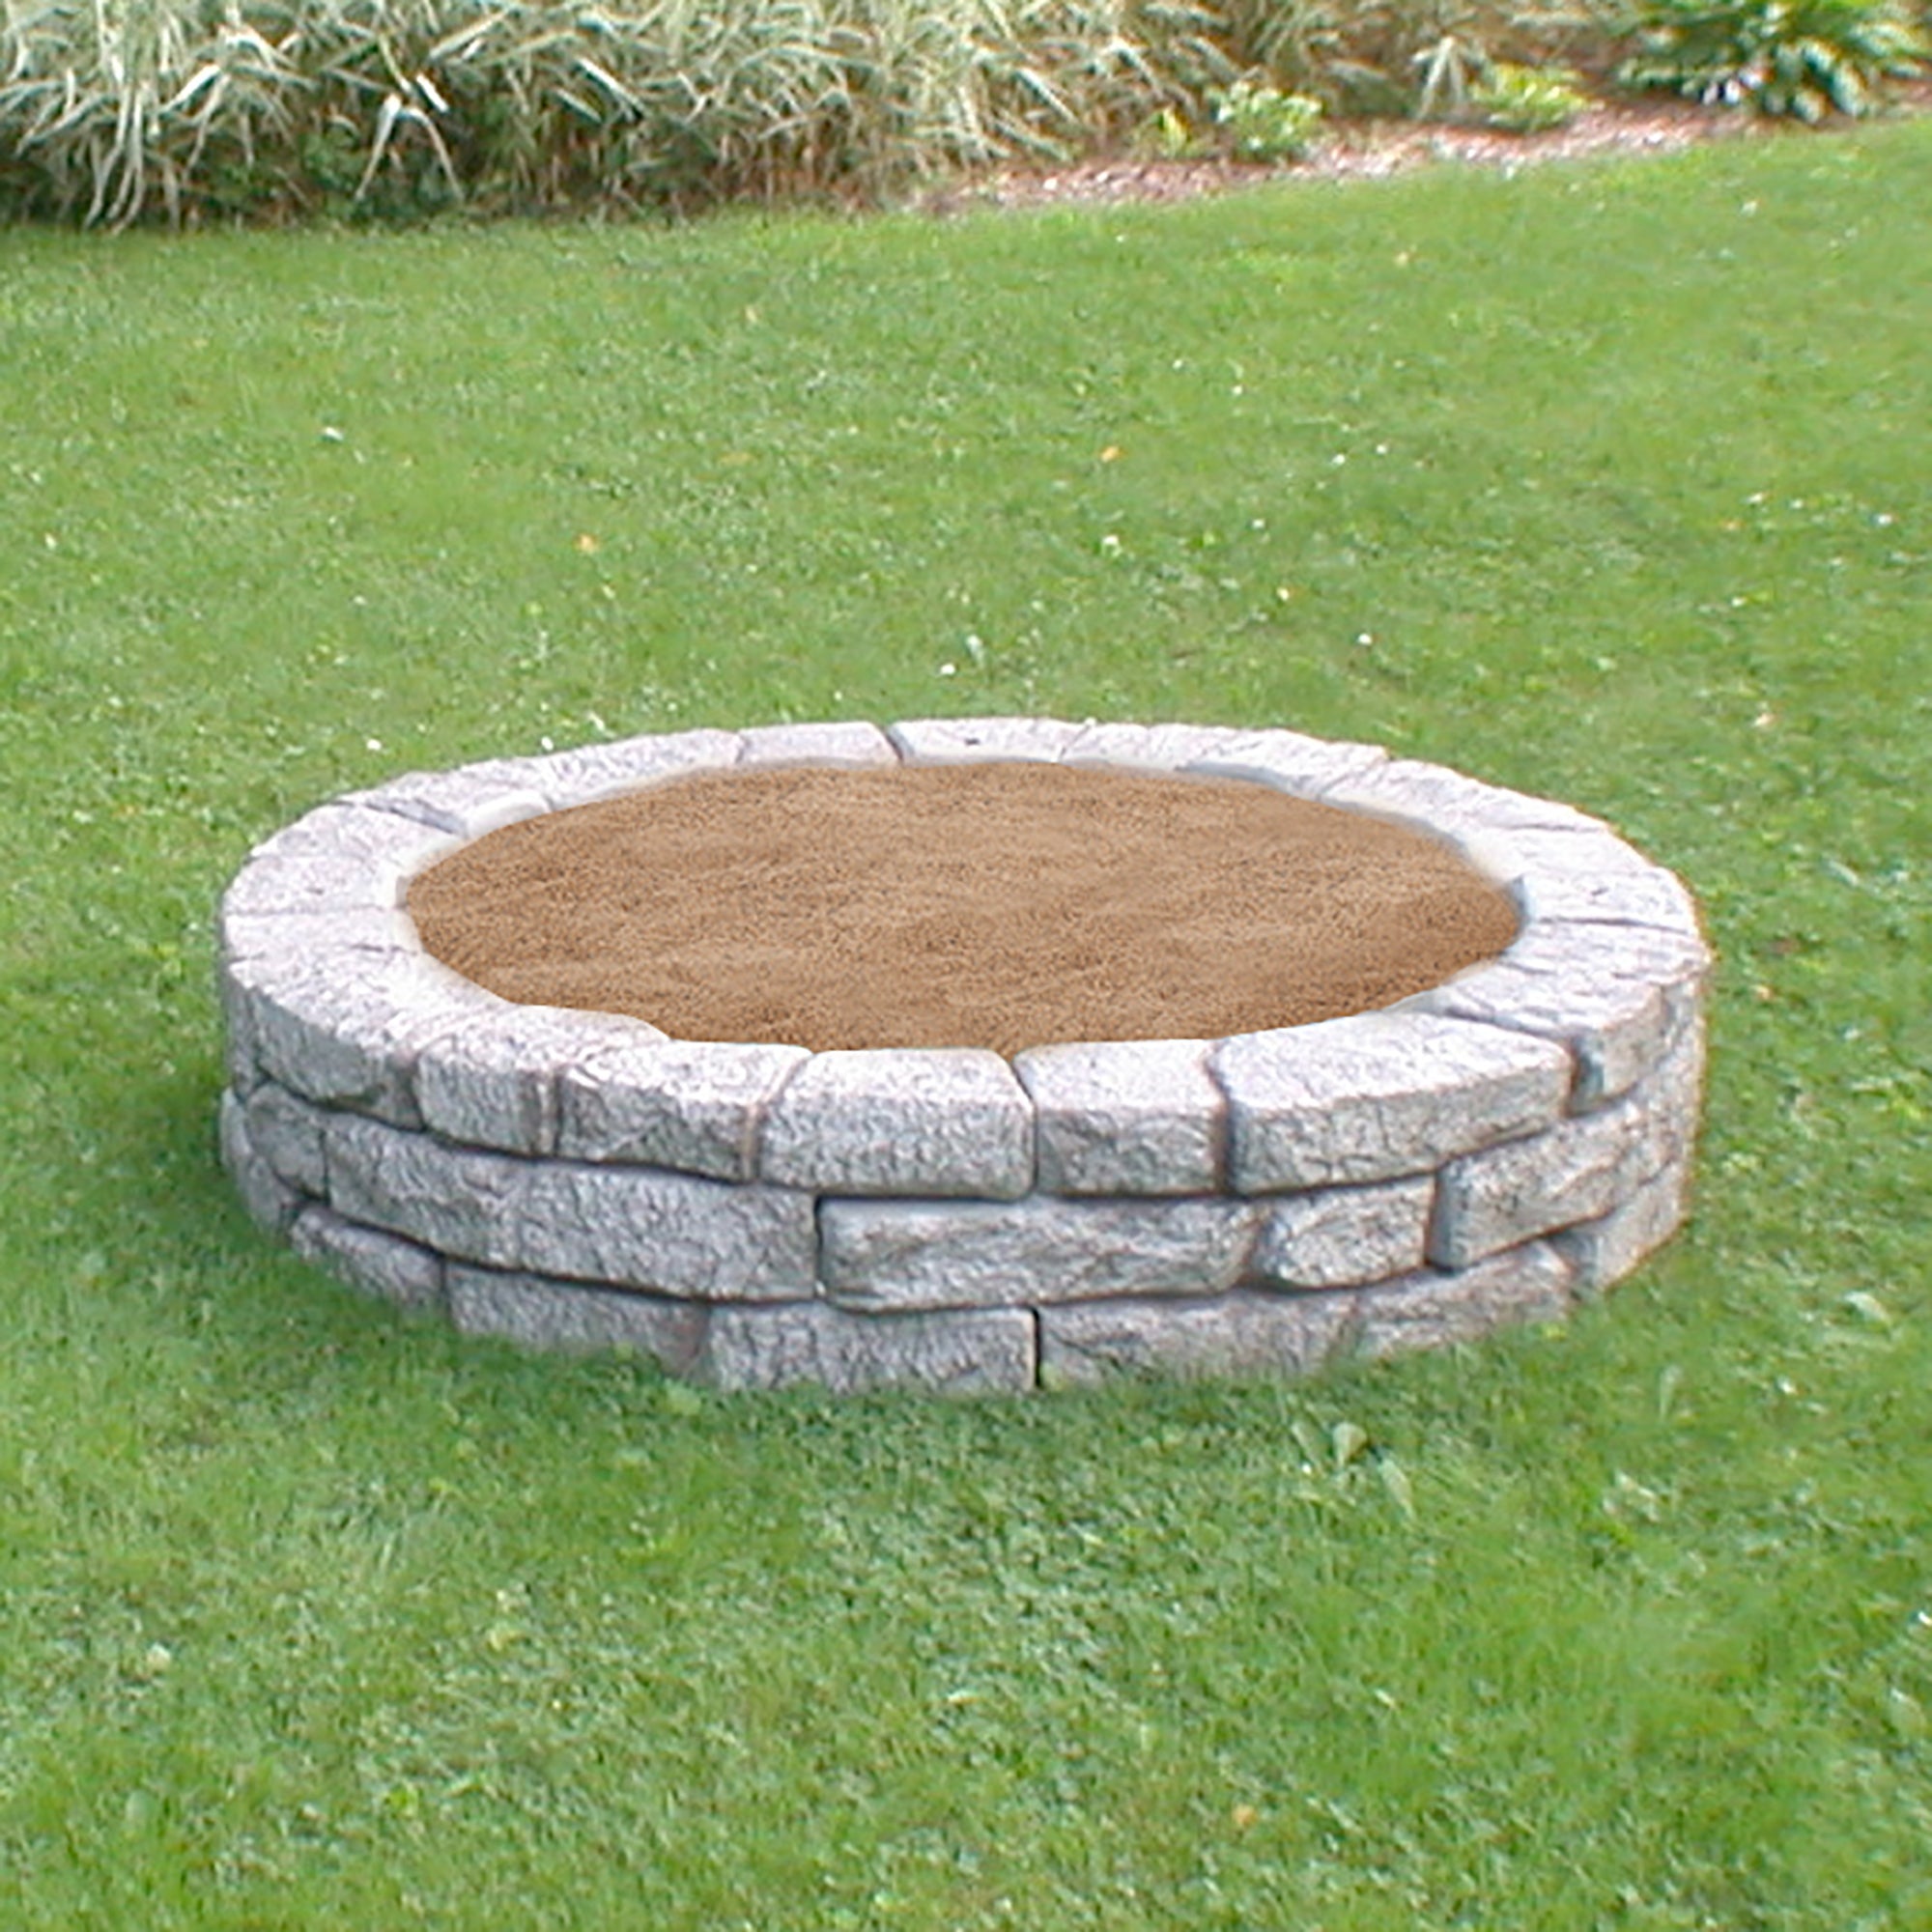 Four pieces of curved rock lock making a circular sandbox with sand inside